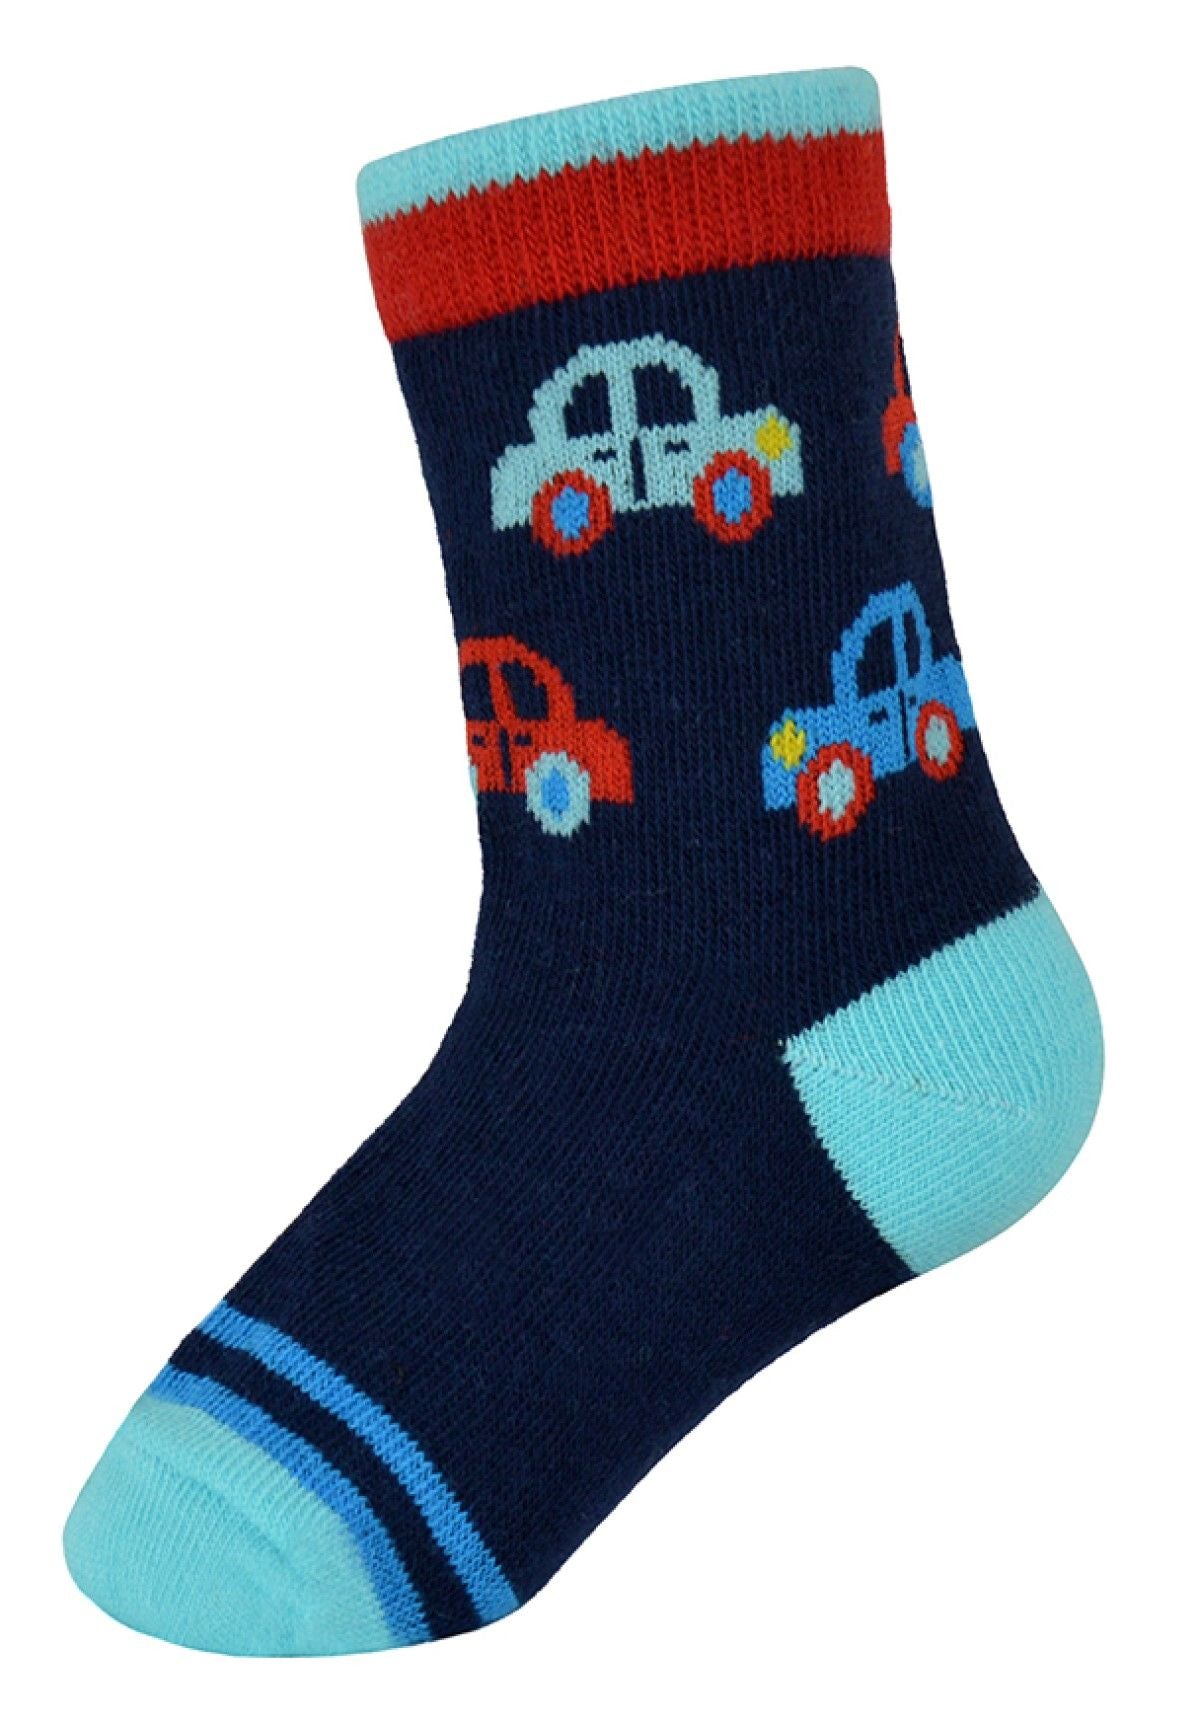 6 Pairs Baby Toddler Boys' Colourful Car Patterned Cotton Rich Socks